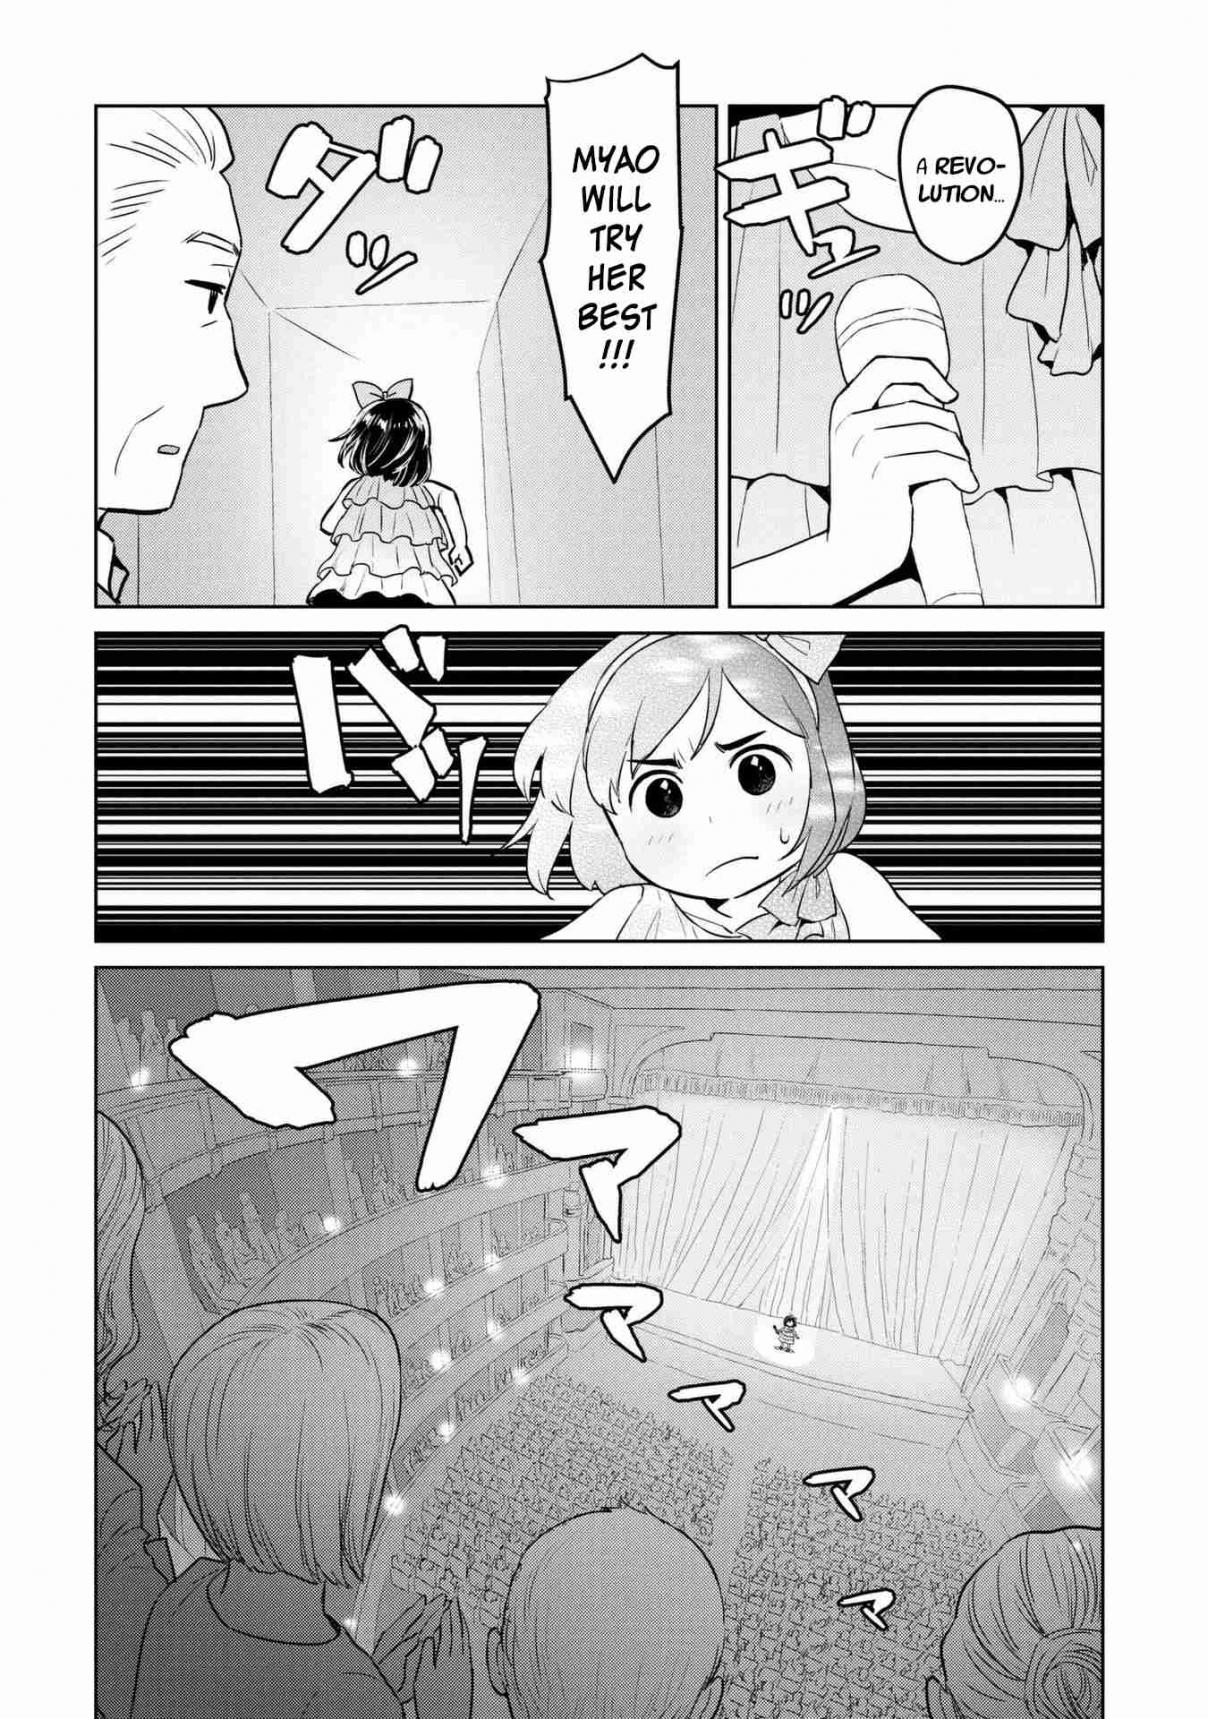 Oh, Our General Myao Vol. 1 Ch. 5 In Which Myao Sings Her Heart Out